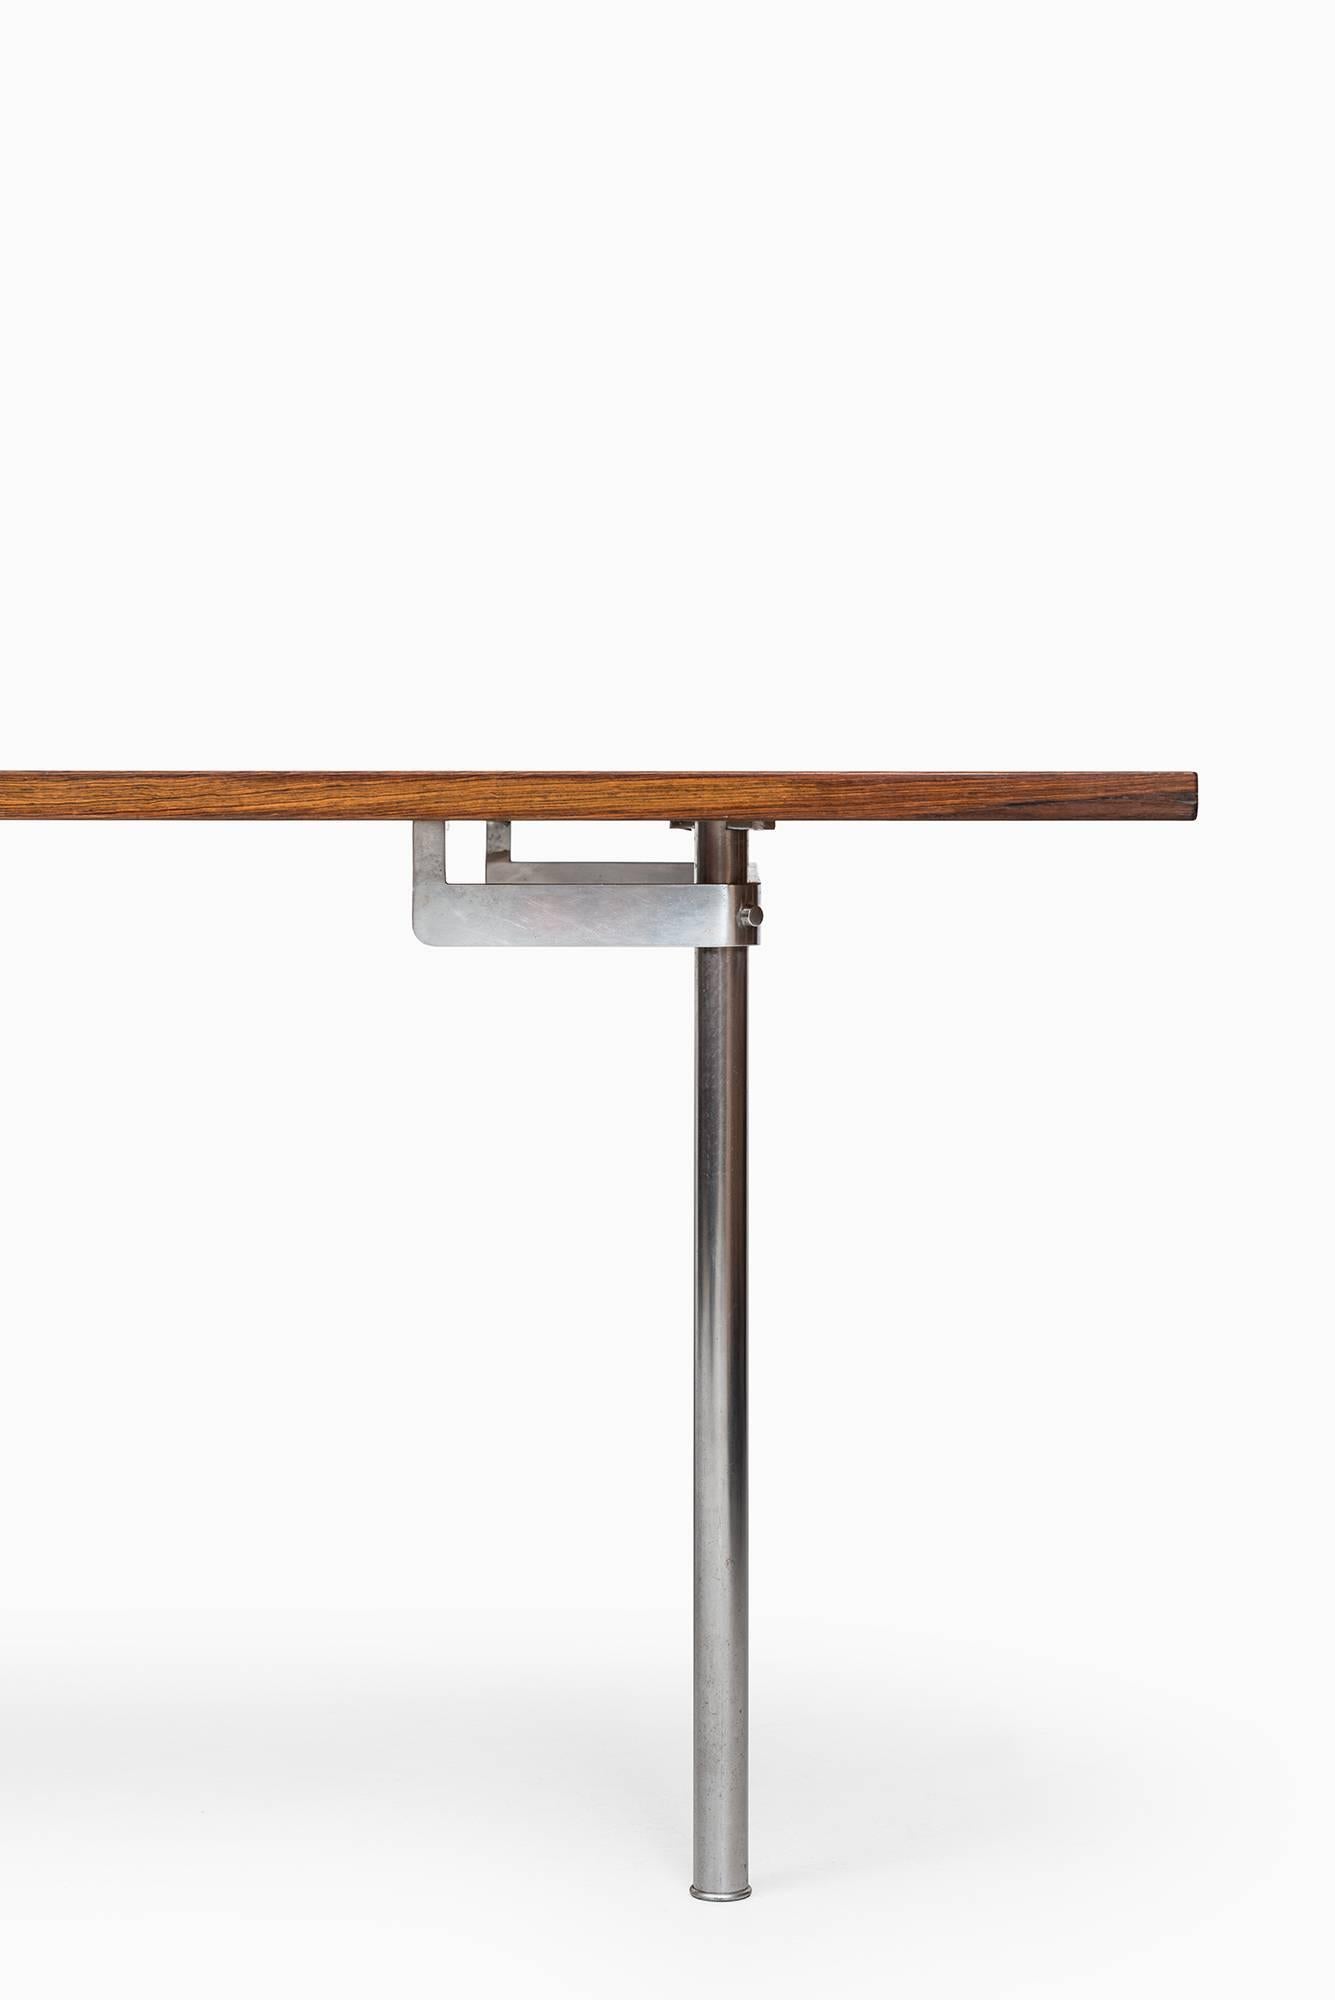 Rare dining table or desk model AT-318 designed by Hans Wegner. Produced by Andreas Tuck in Denmark.